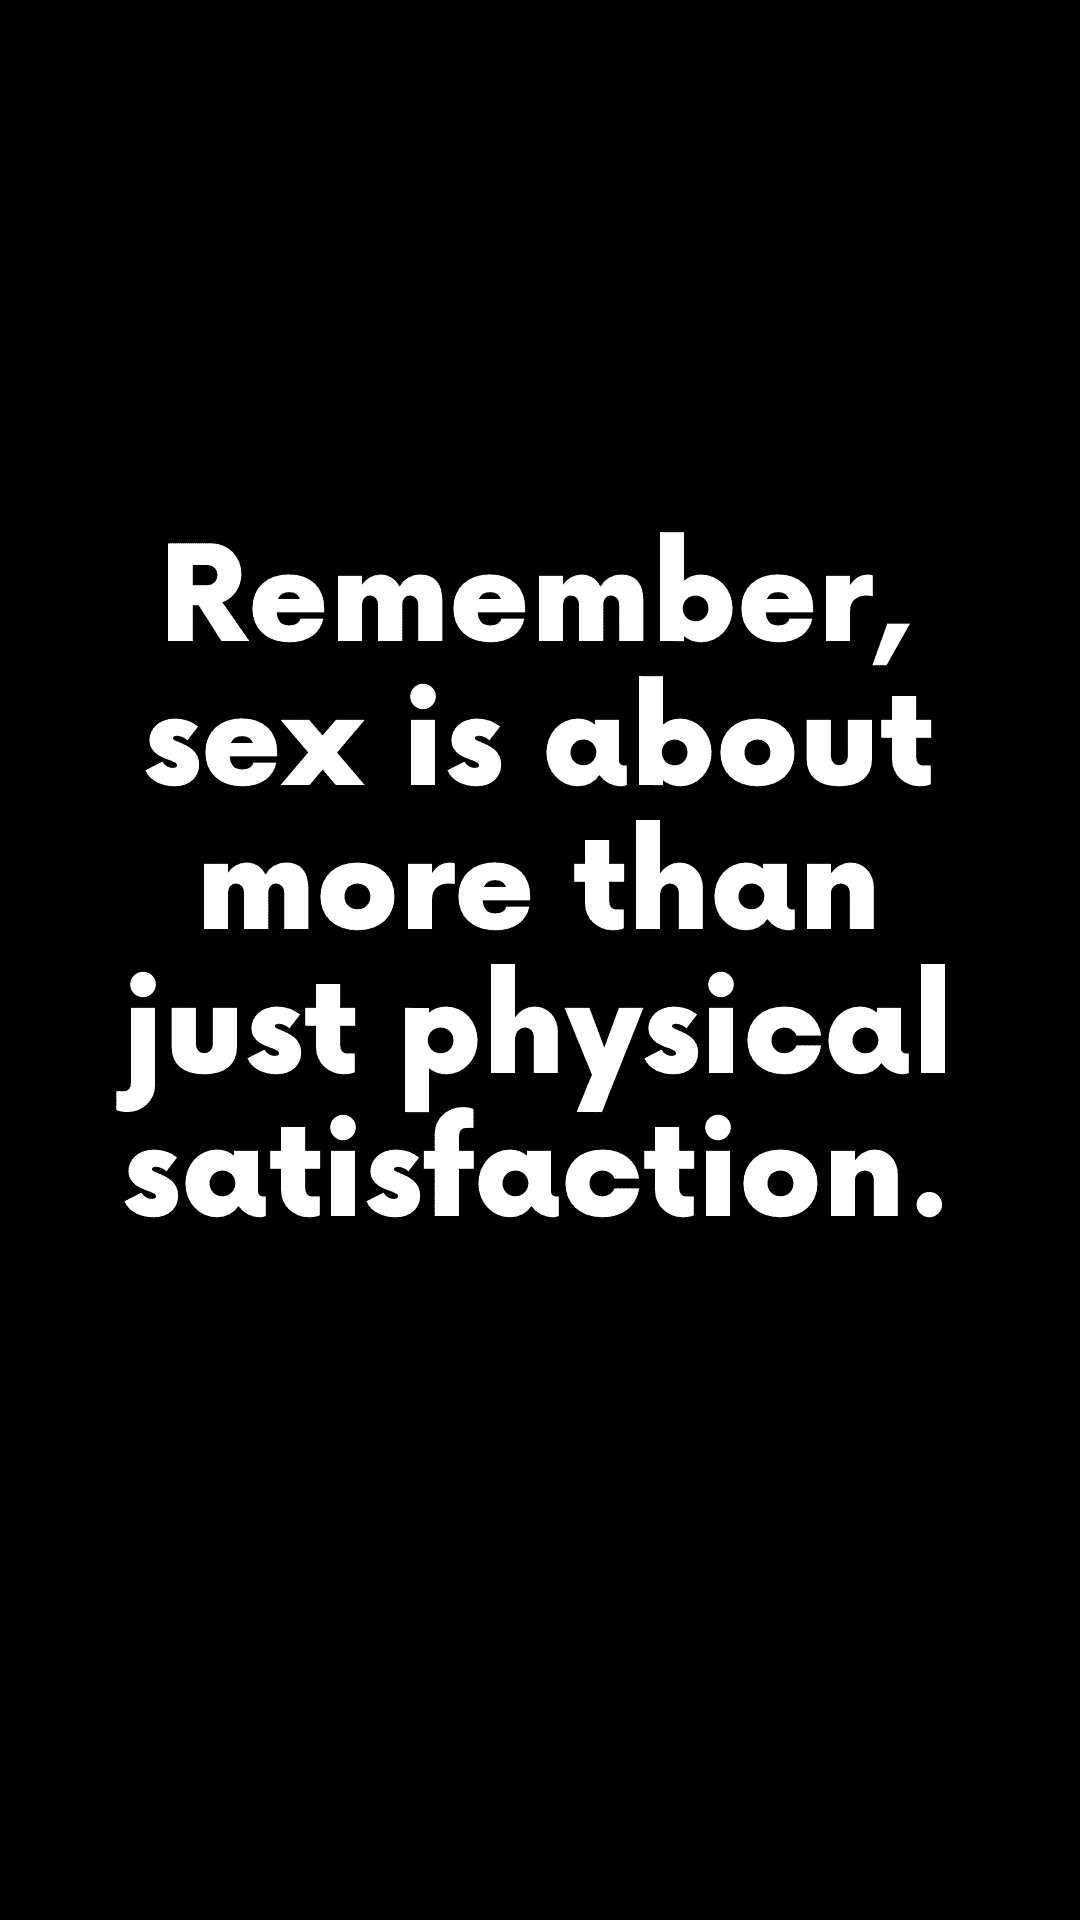 Remember, sex is about more than just physical satisfaction. (Quote)